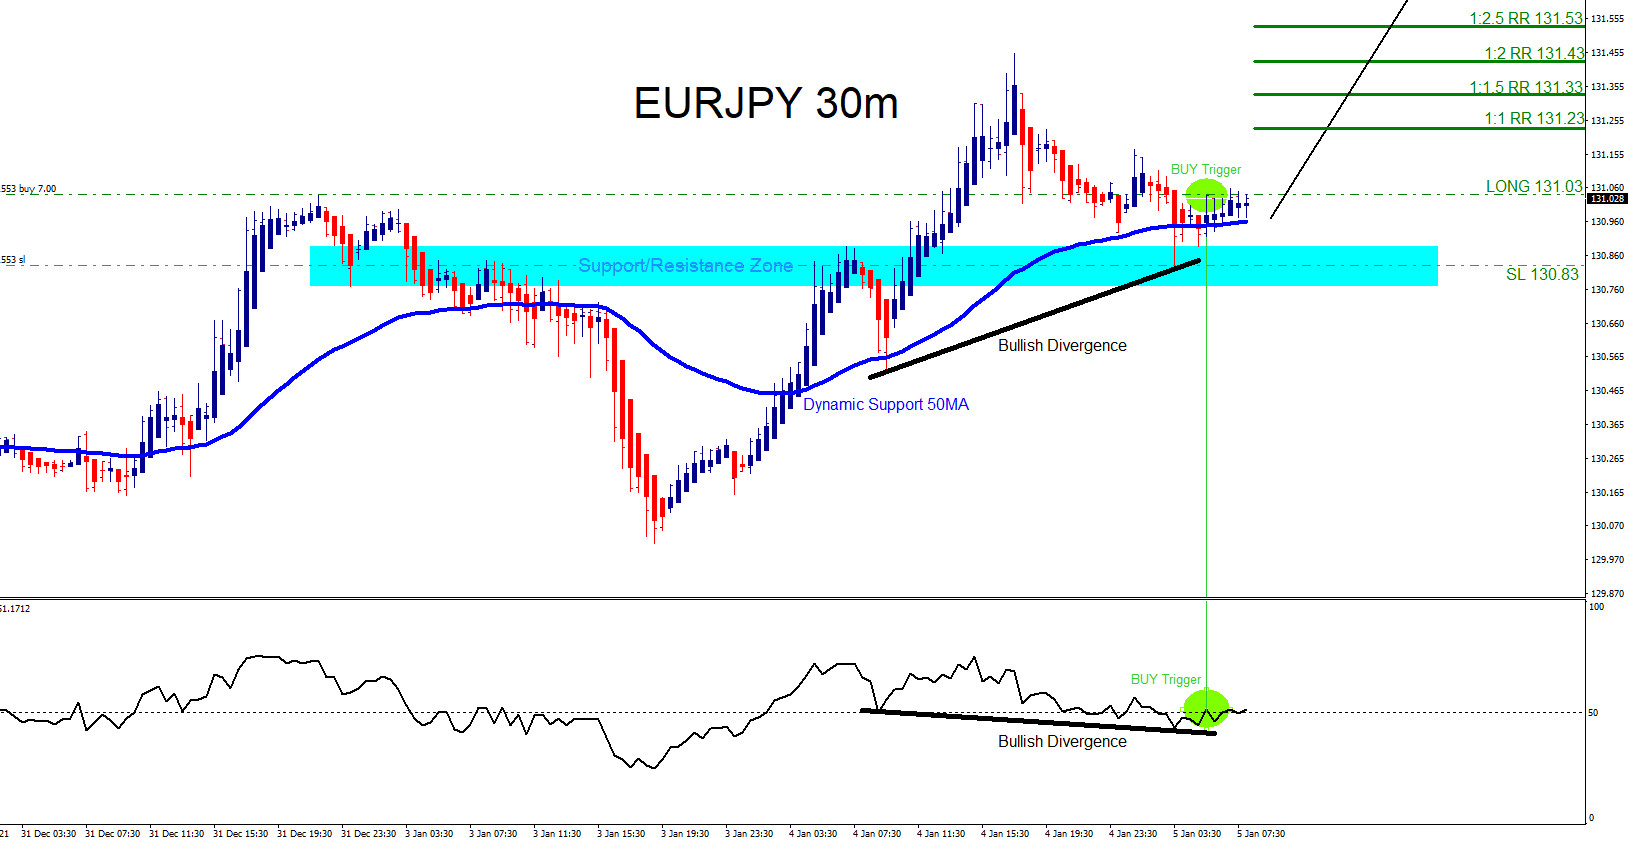 EURJPY : Trading the Move Higher